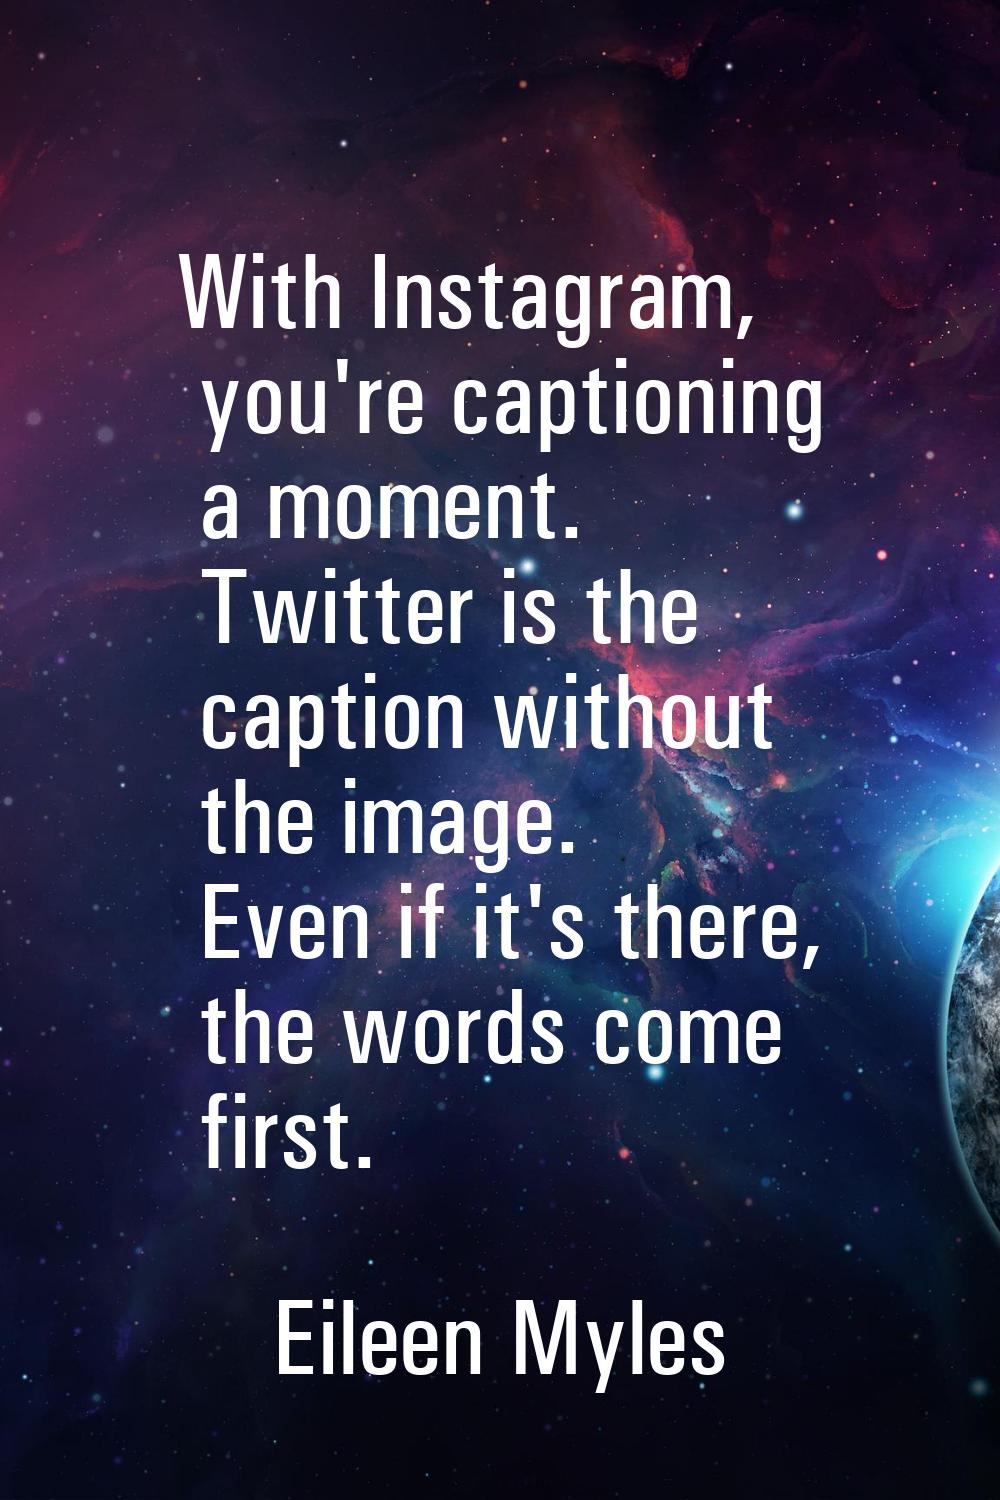 With Instagram, you're captioning a moment. Twitter is the caption without the image. Even if it's 